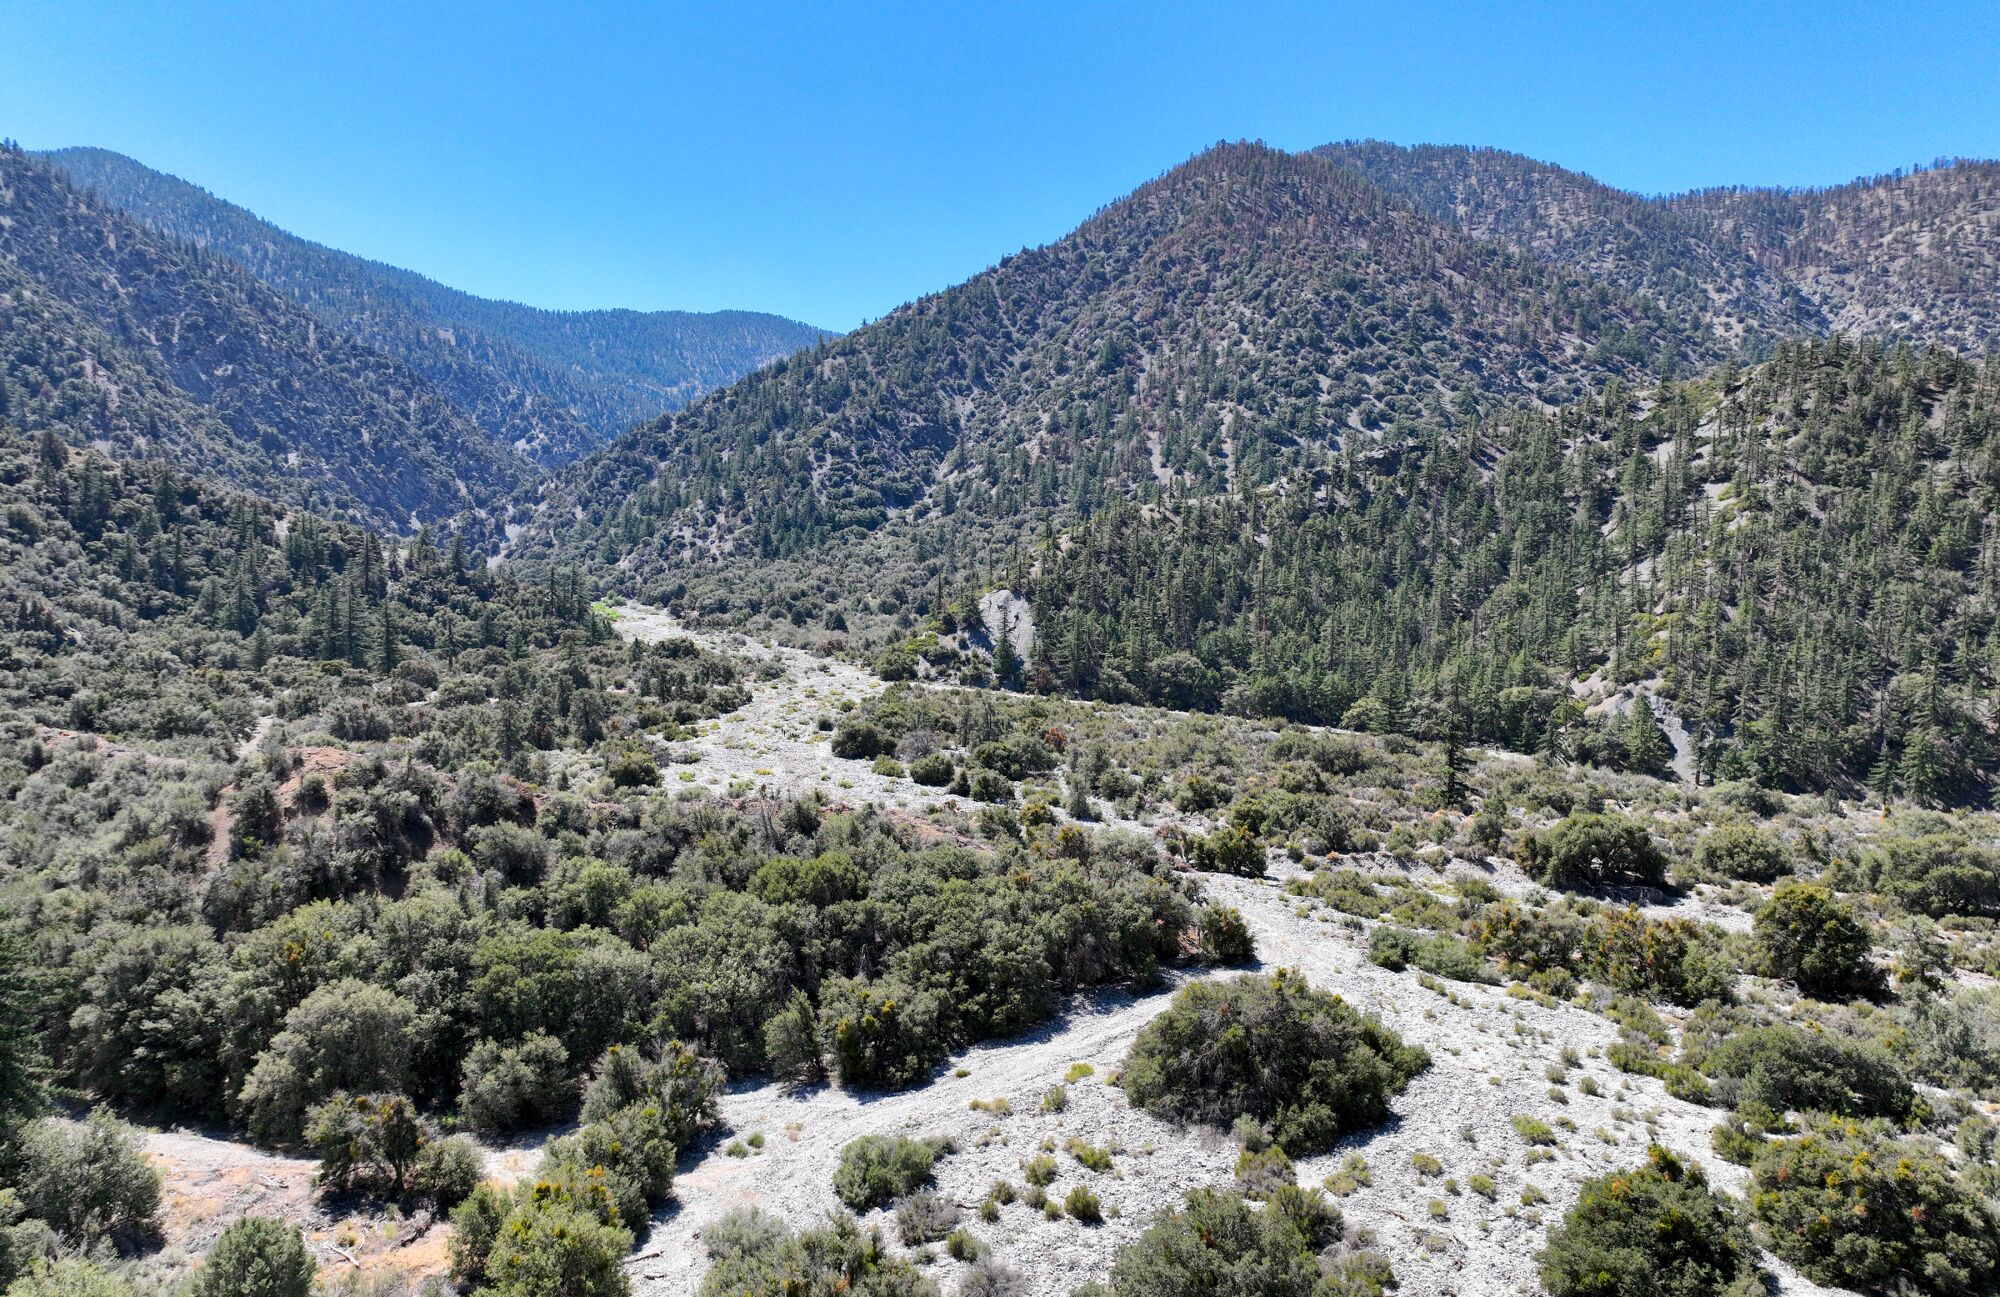 The San Gabriel Mountains inside the Angeles National Forest